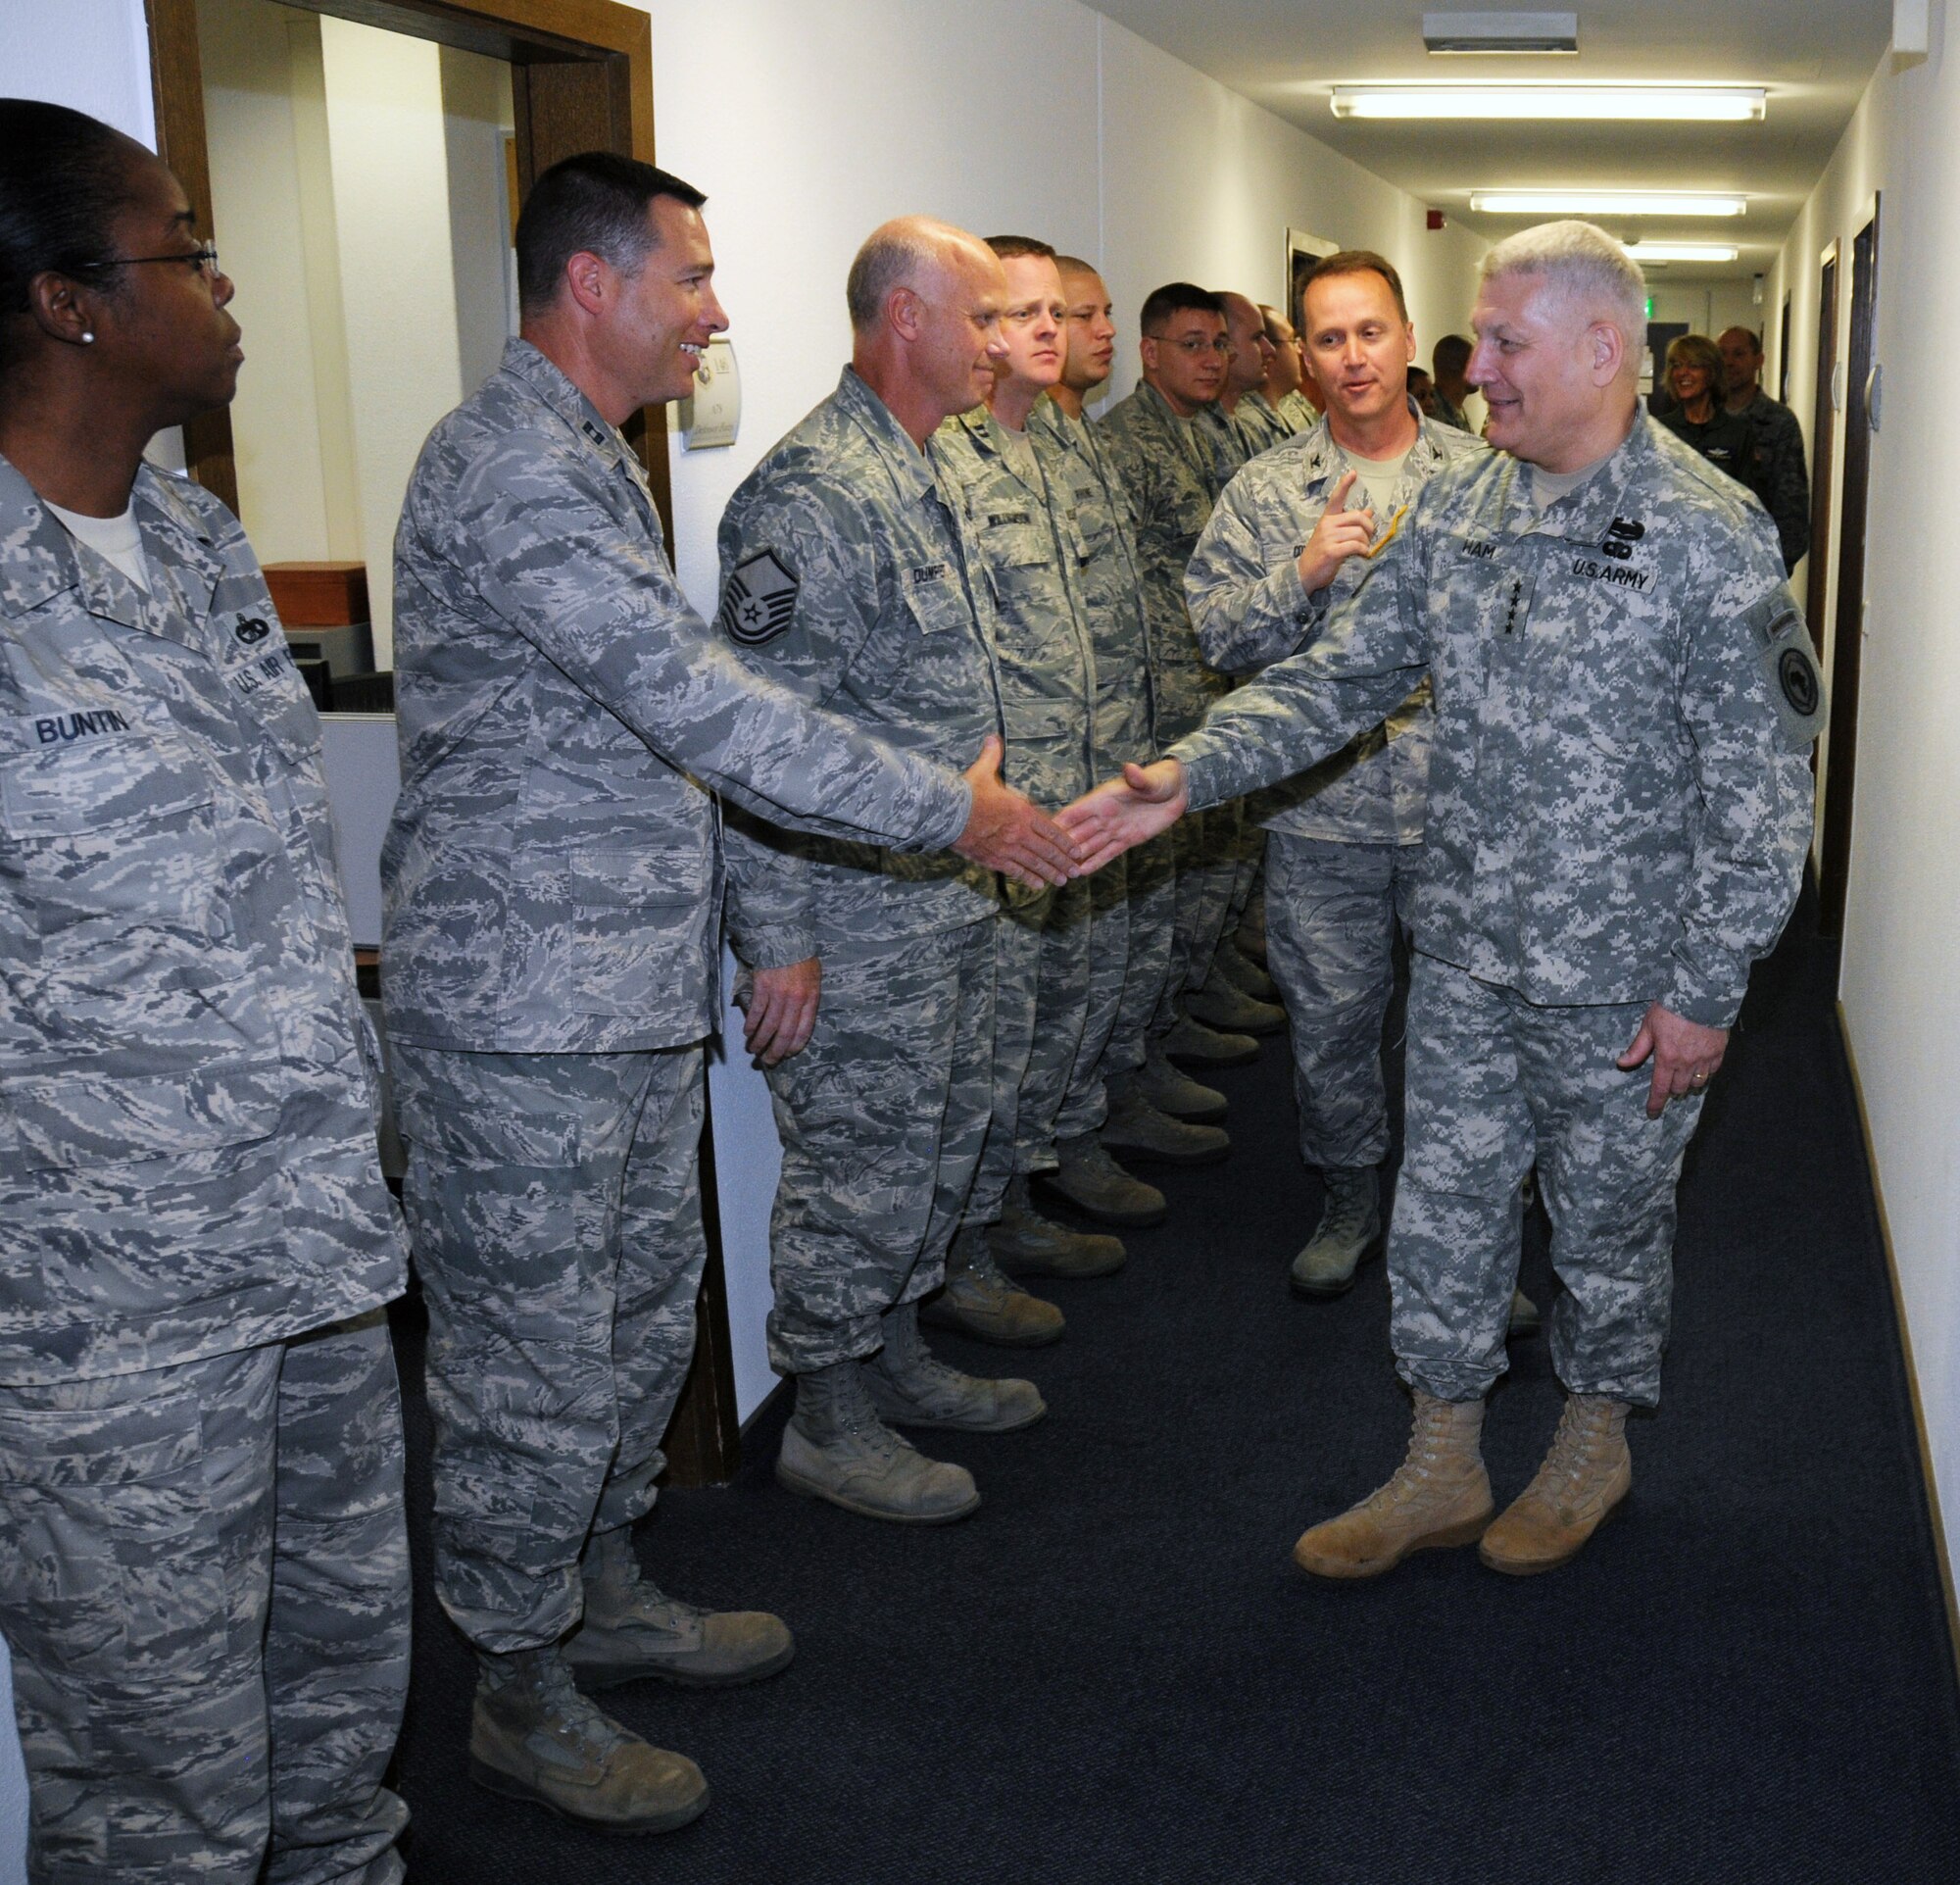 RAMSTEIN AIR BASE, Germany -- U.S. Africa Command Commander Gen. Carter Ham shakes hands with Airmen from 17th Air Force (Air Forces Africa) during a
visit here July 5, 2011. Gen. Ham thanked the Airmen for their continued
work with Africa and presented medals for their contributions during
Operation Odyssey Dawn. (U.S. Air Force photo by Master Sgt. Jim Fisher)
